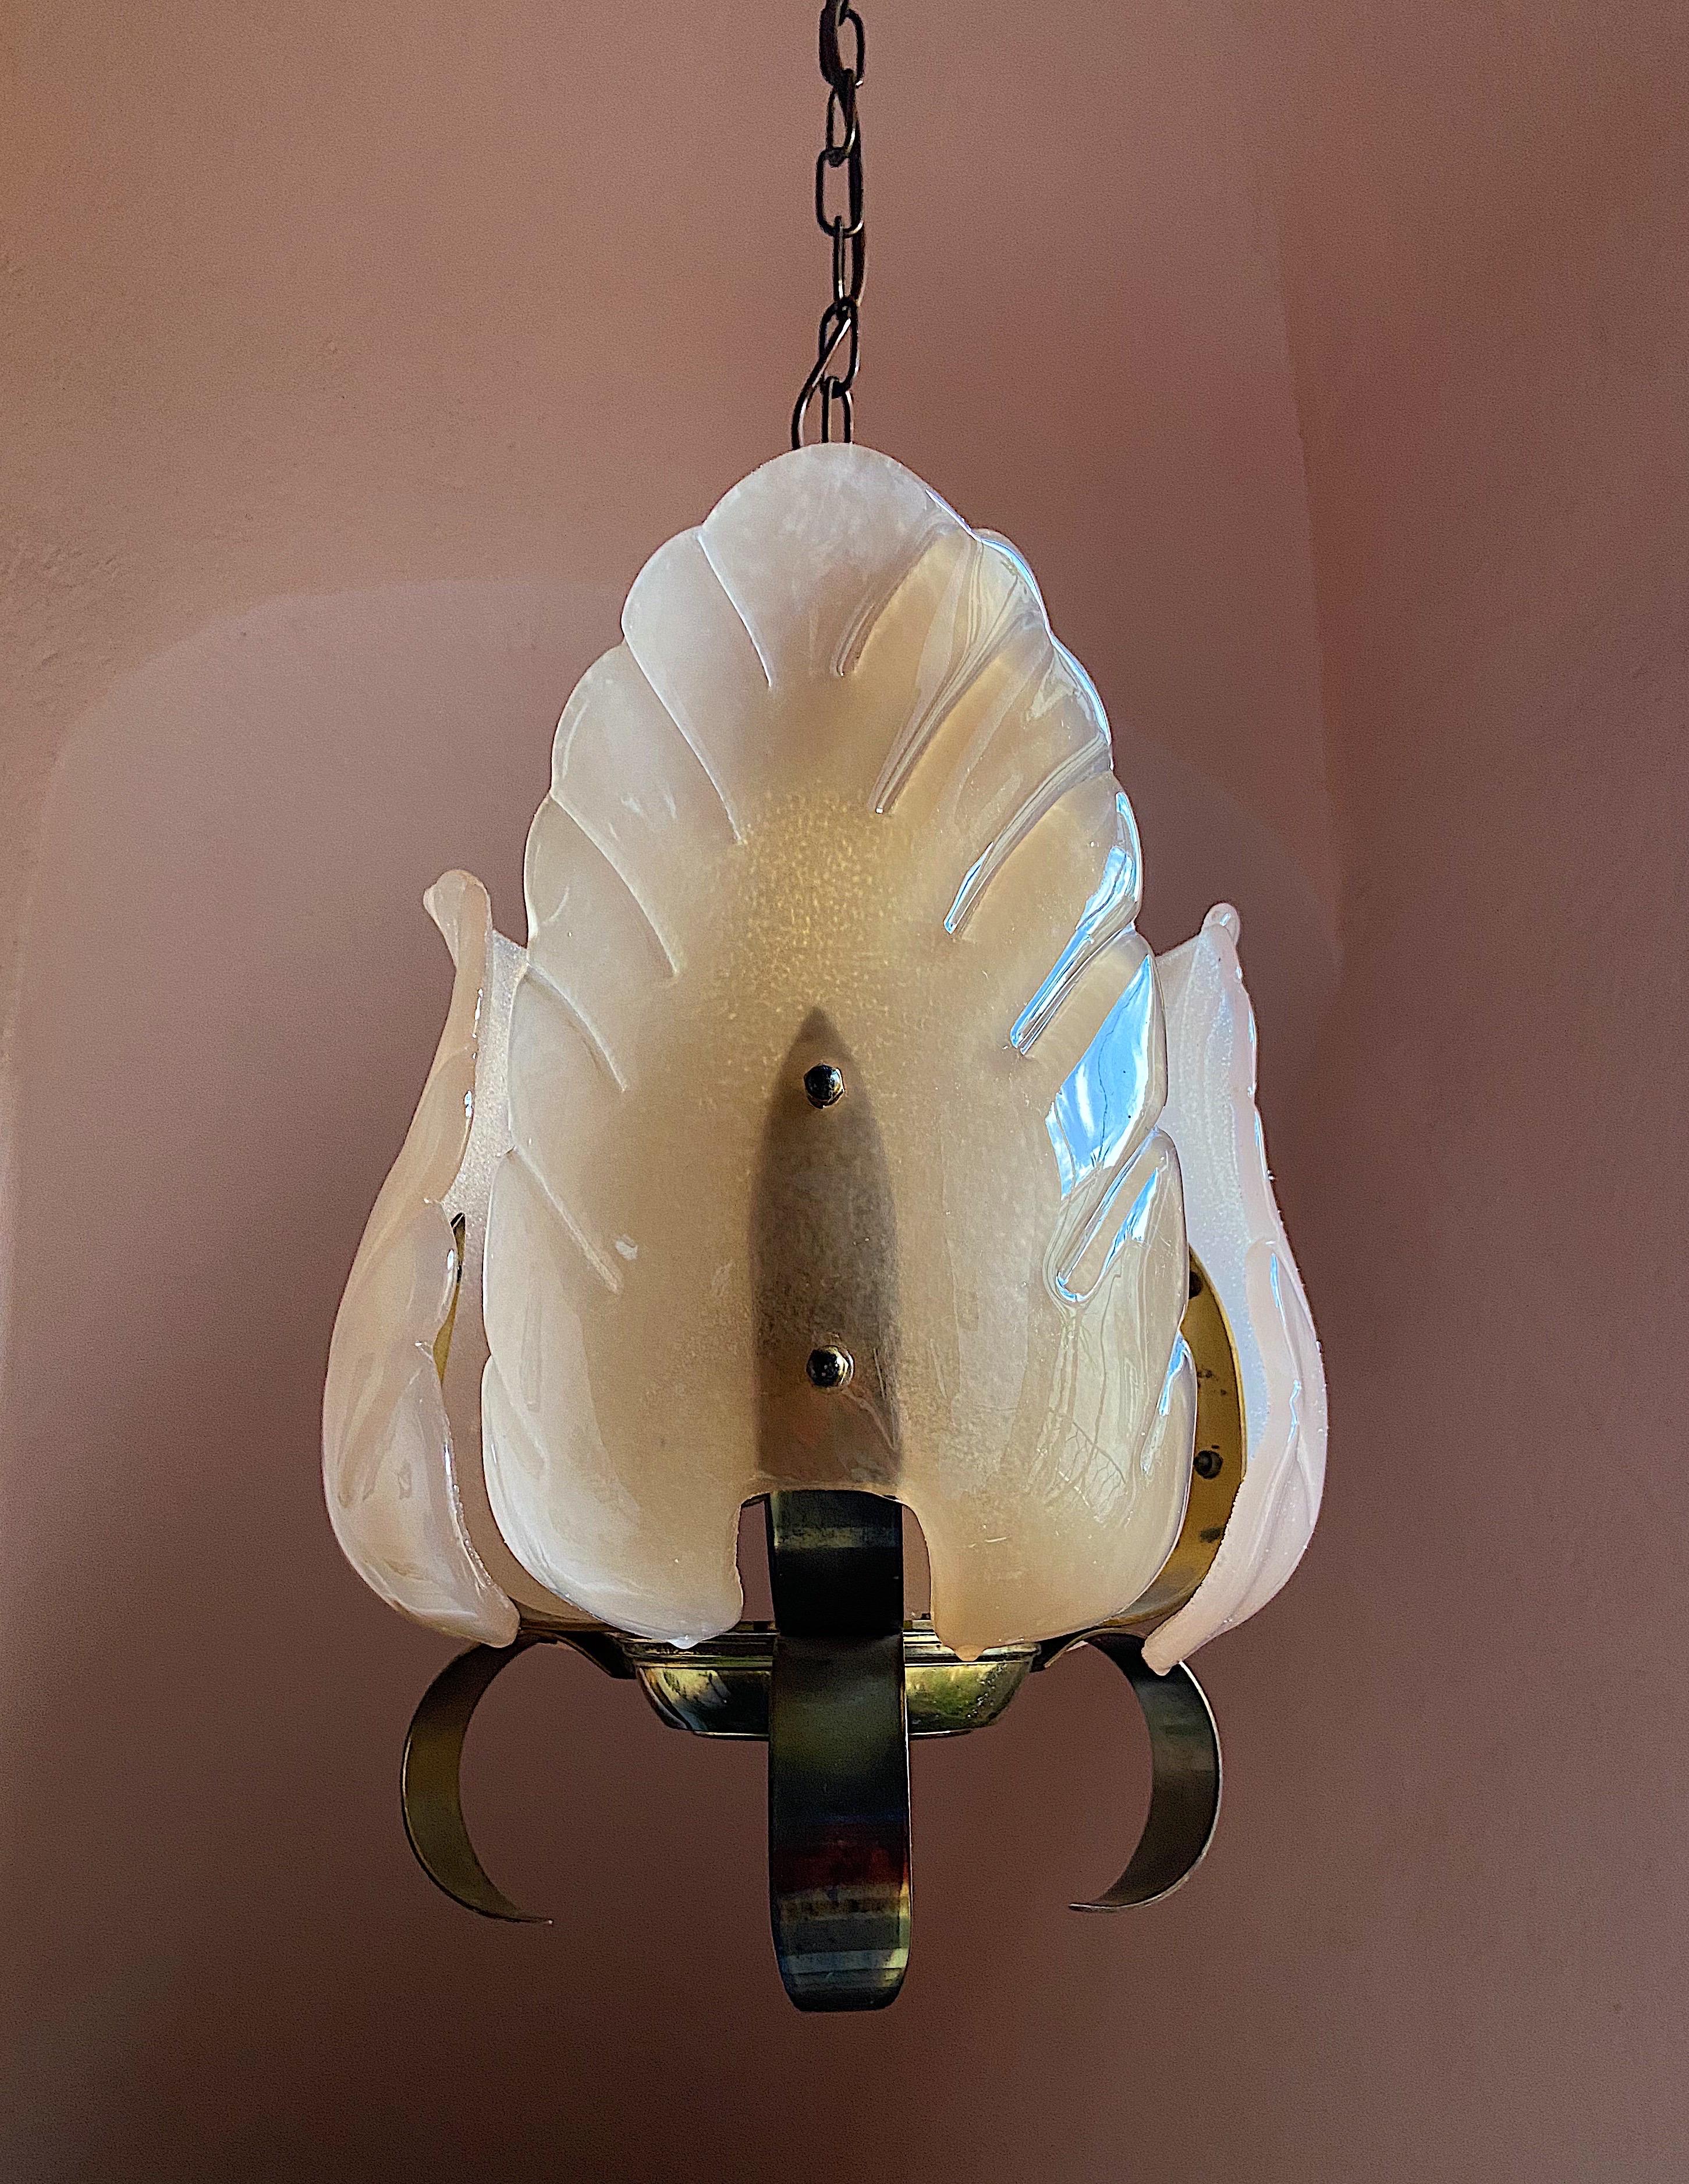 Stunning Carl Fagerlund Chandelier in Murano Glass, 1970s In Good Condition For Sale In Palermo, PA